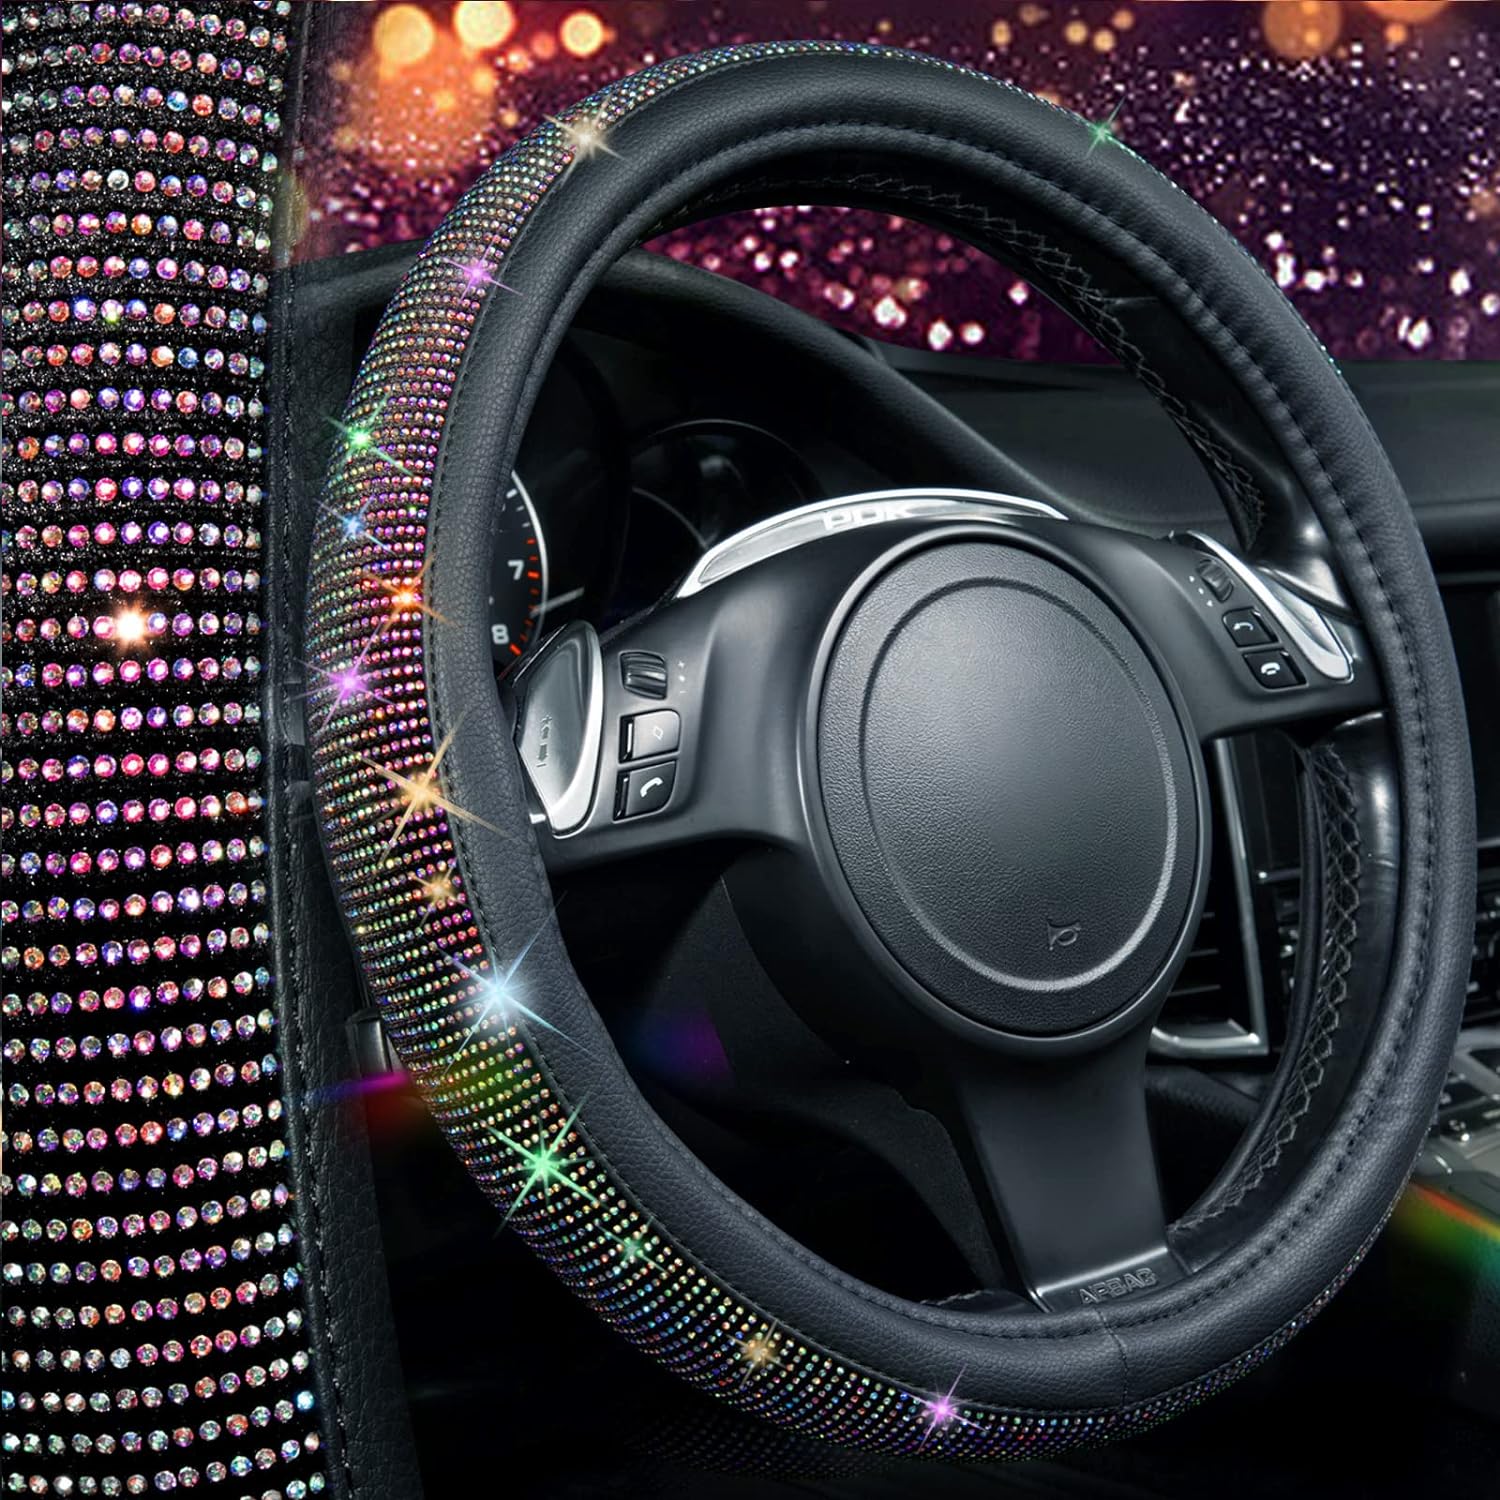 CAR PASS Diamond Leather Steering Wheel Cover & Iridescent Diamond &Nappa Calfskin Leather Cushioned,Bling seat Covers Fit for Auto SUV Sedan,Sparkly Glitter Shining Rhinestone